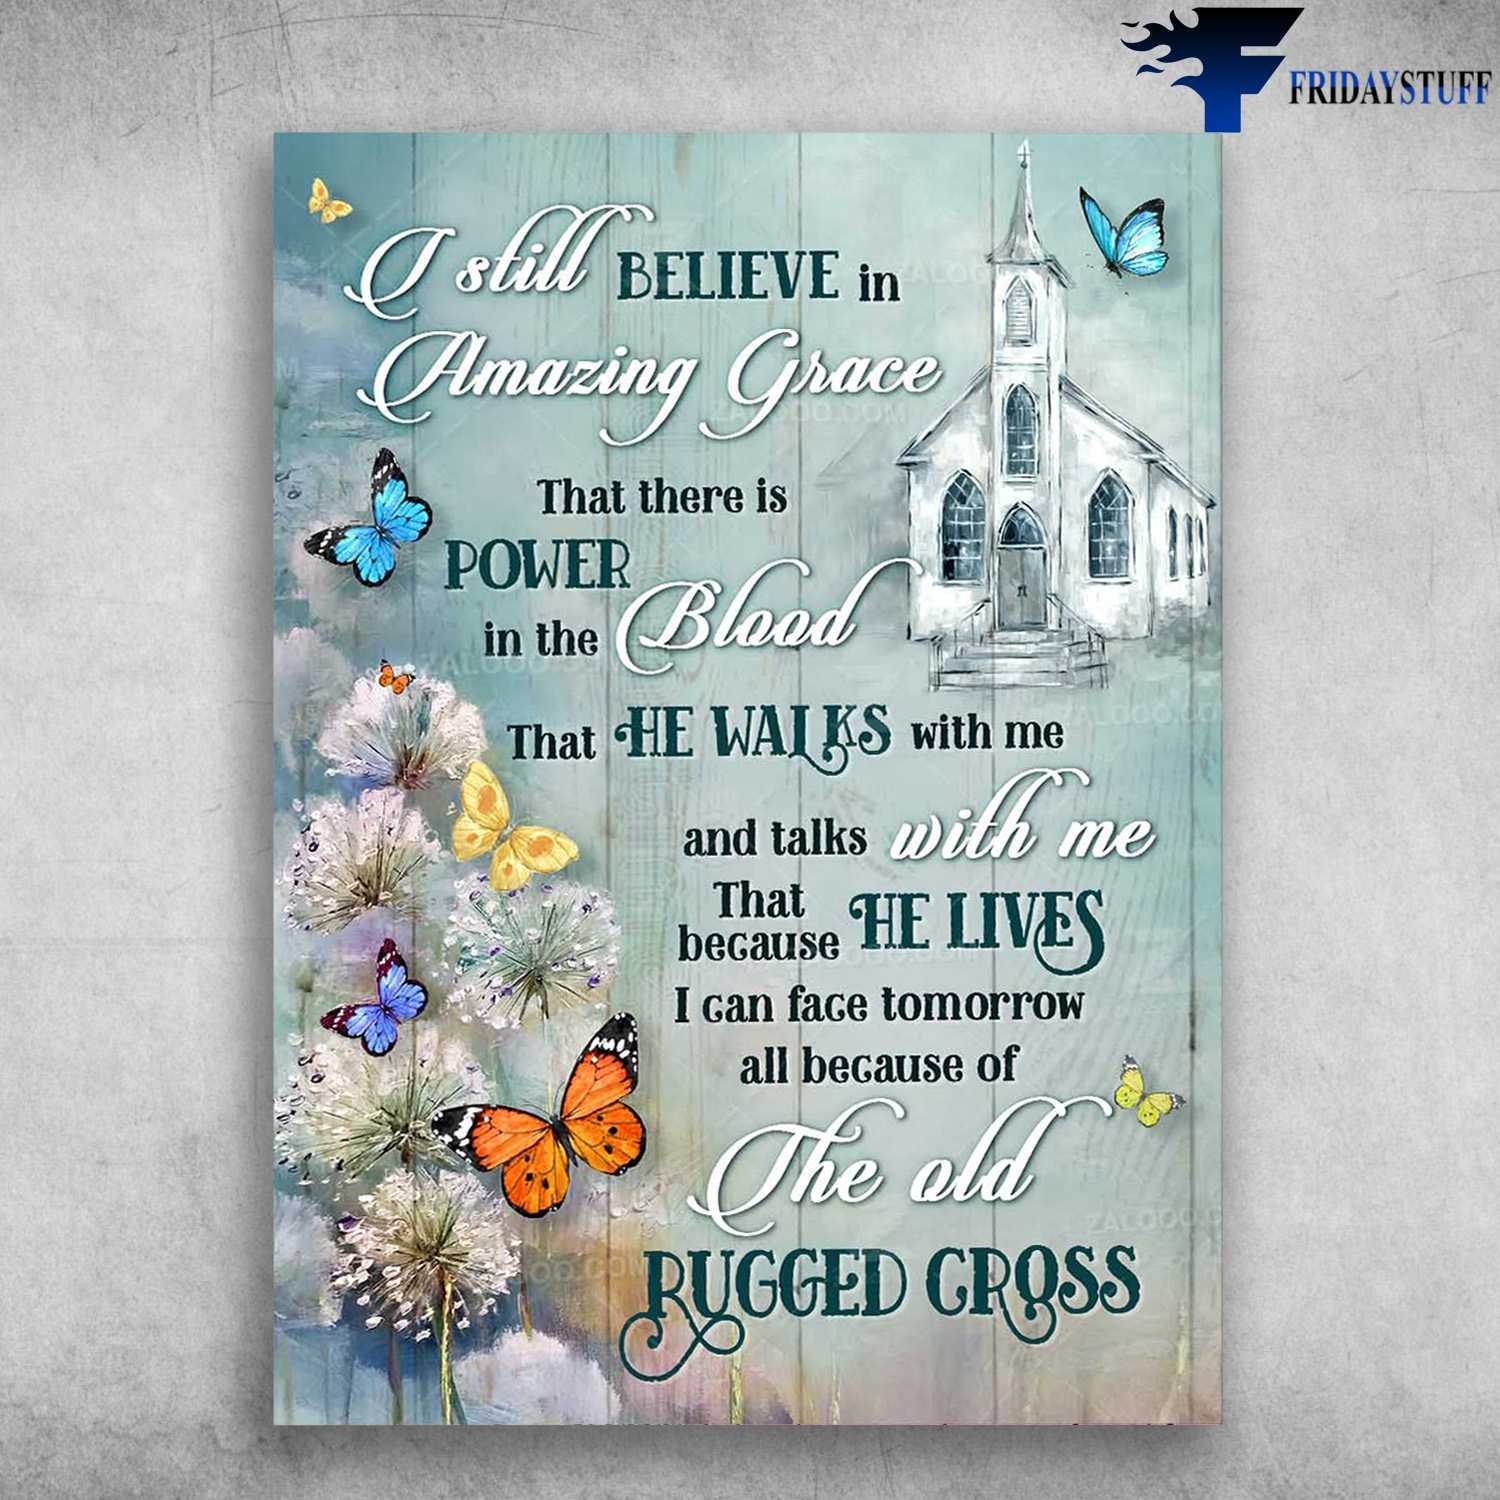 Dandelion Butterfly, Church Poster - I Still Believe In Amazing Grace, That There Is Power In The Blood, That He Walks With Me, And Talks With me